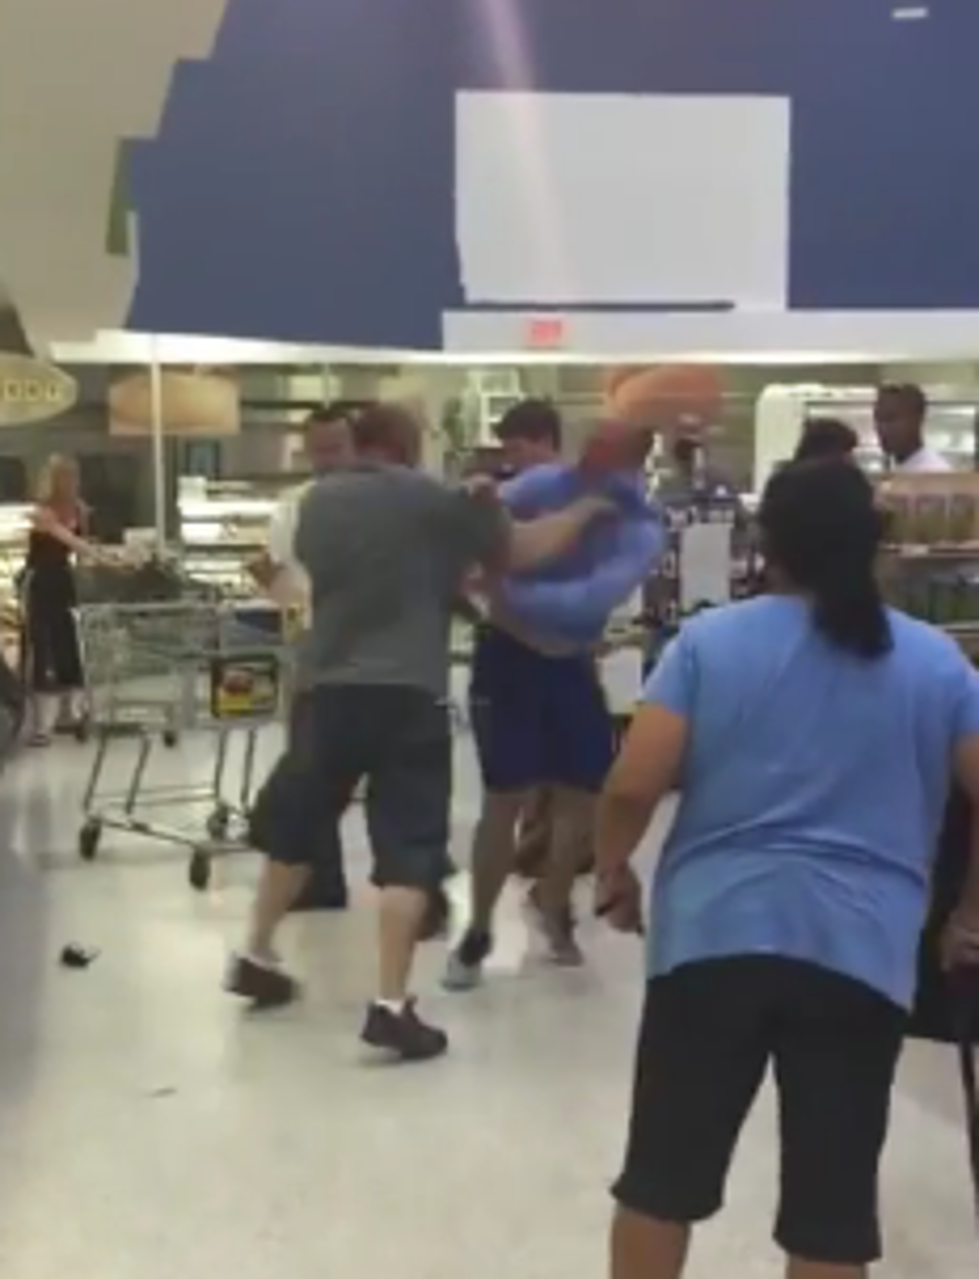 Dads Brawl In The Deli Aisle Of Wal-Mart [VIDEO]